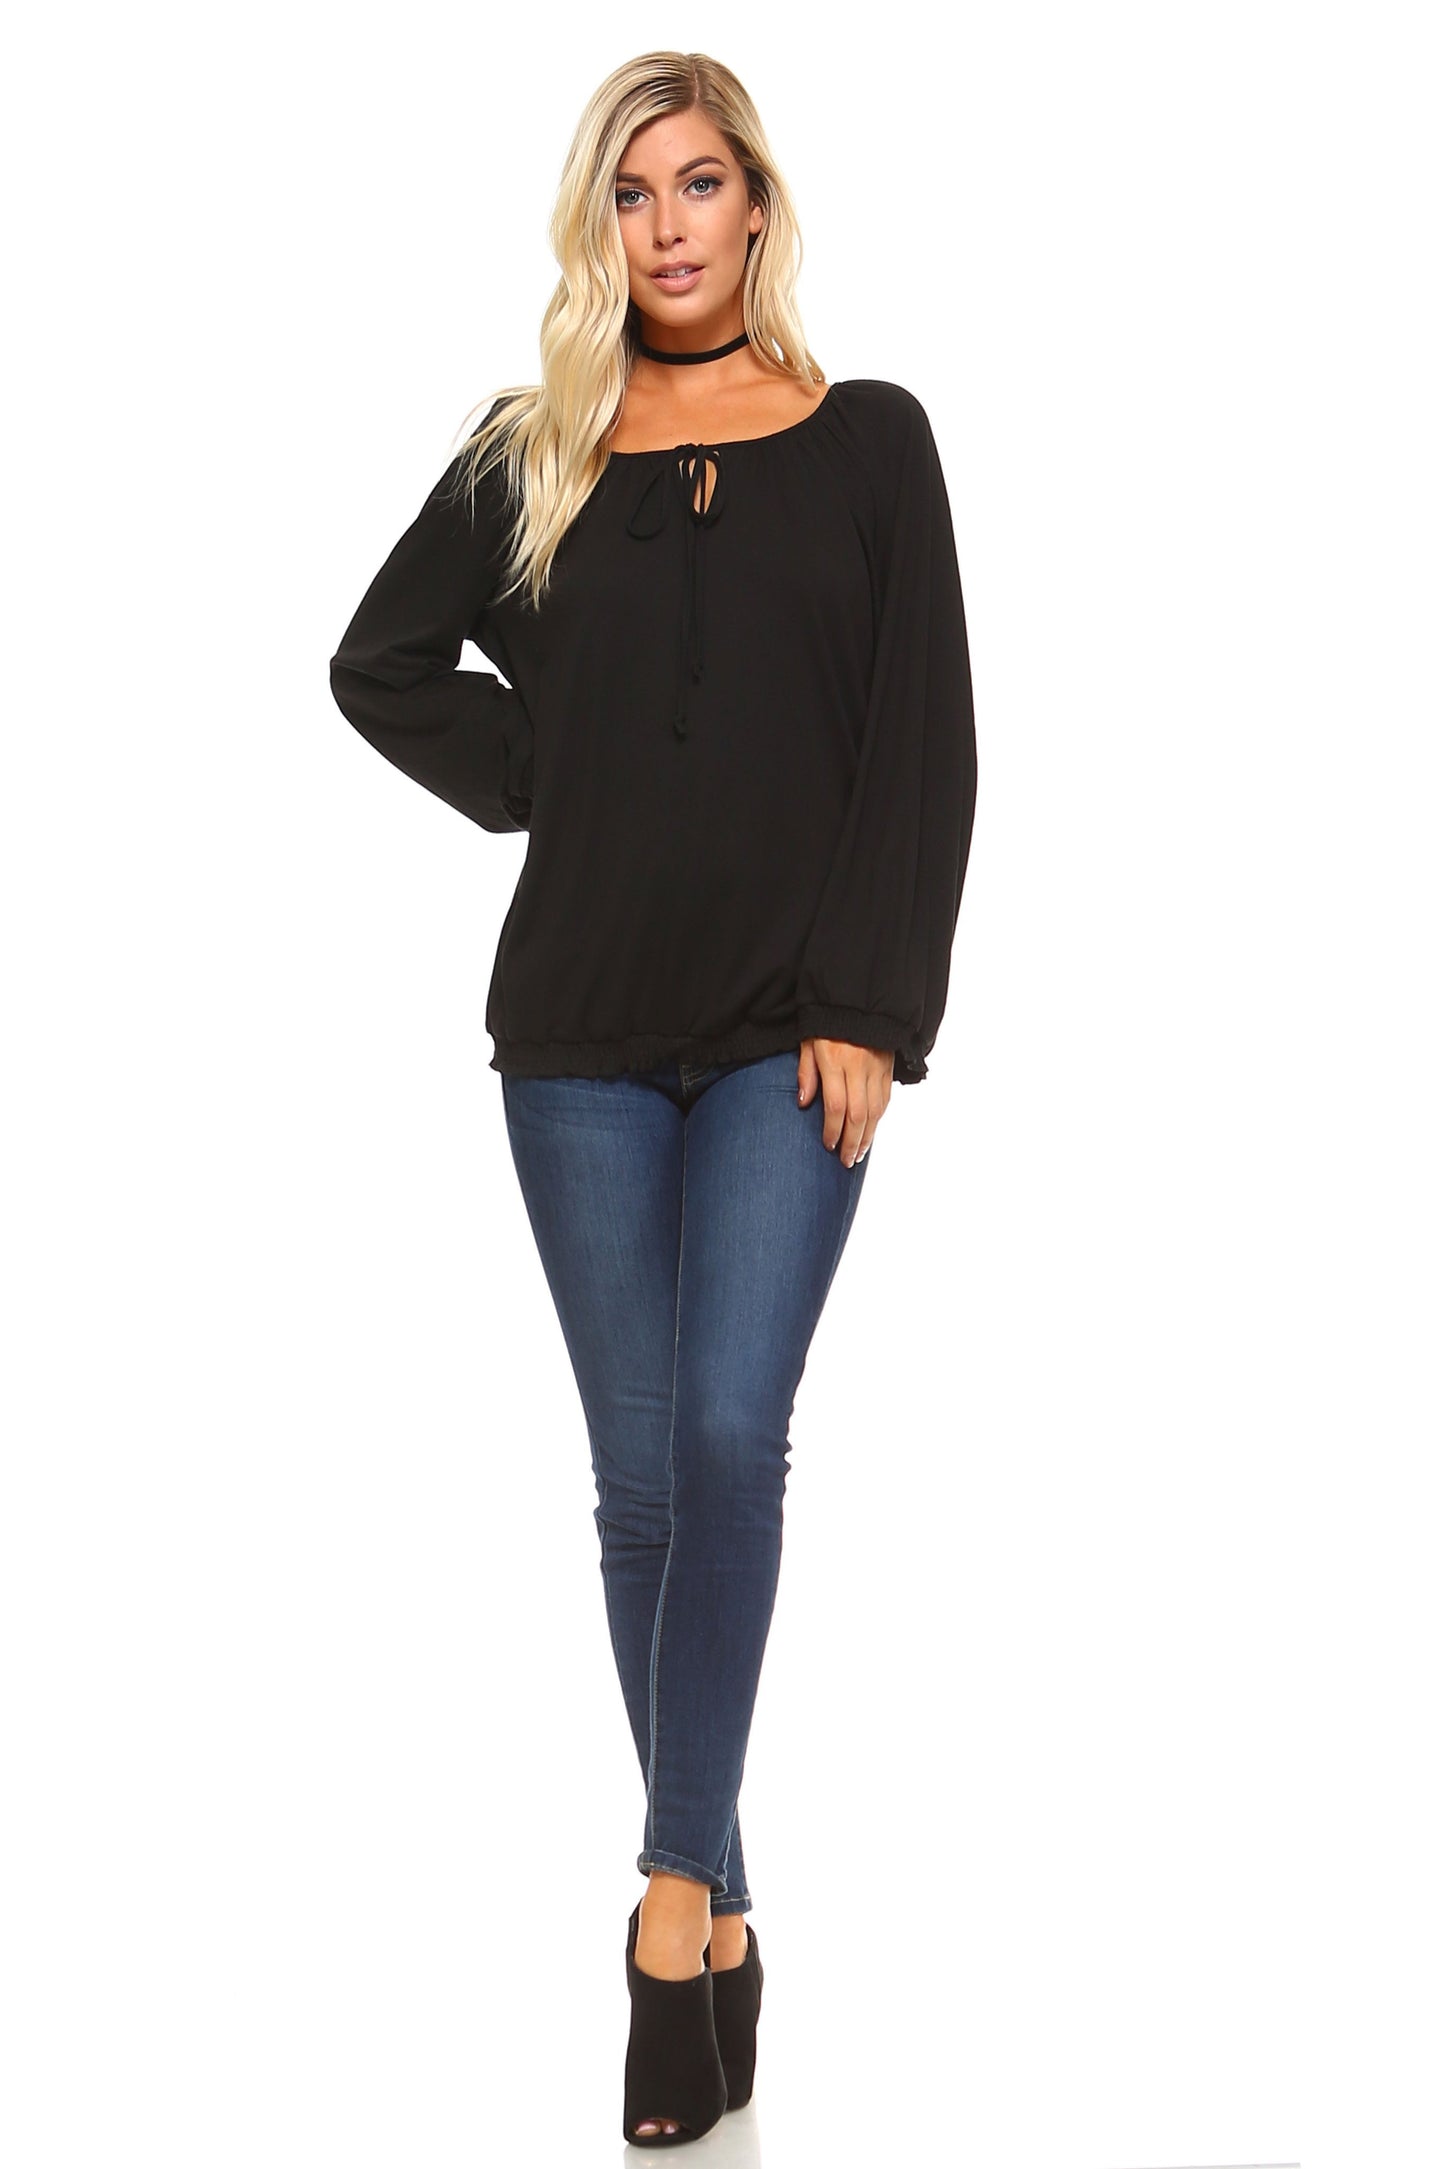 Women's Long Sleeve Peasant Top | CozyCouture® - Stringspeed